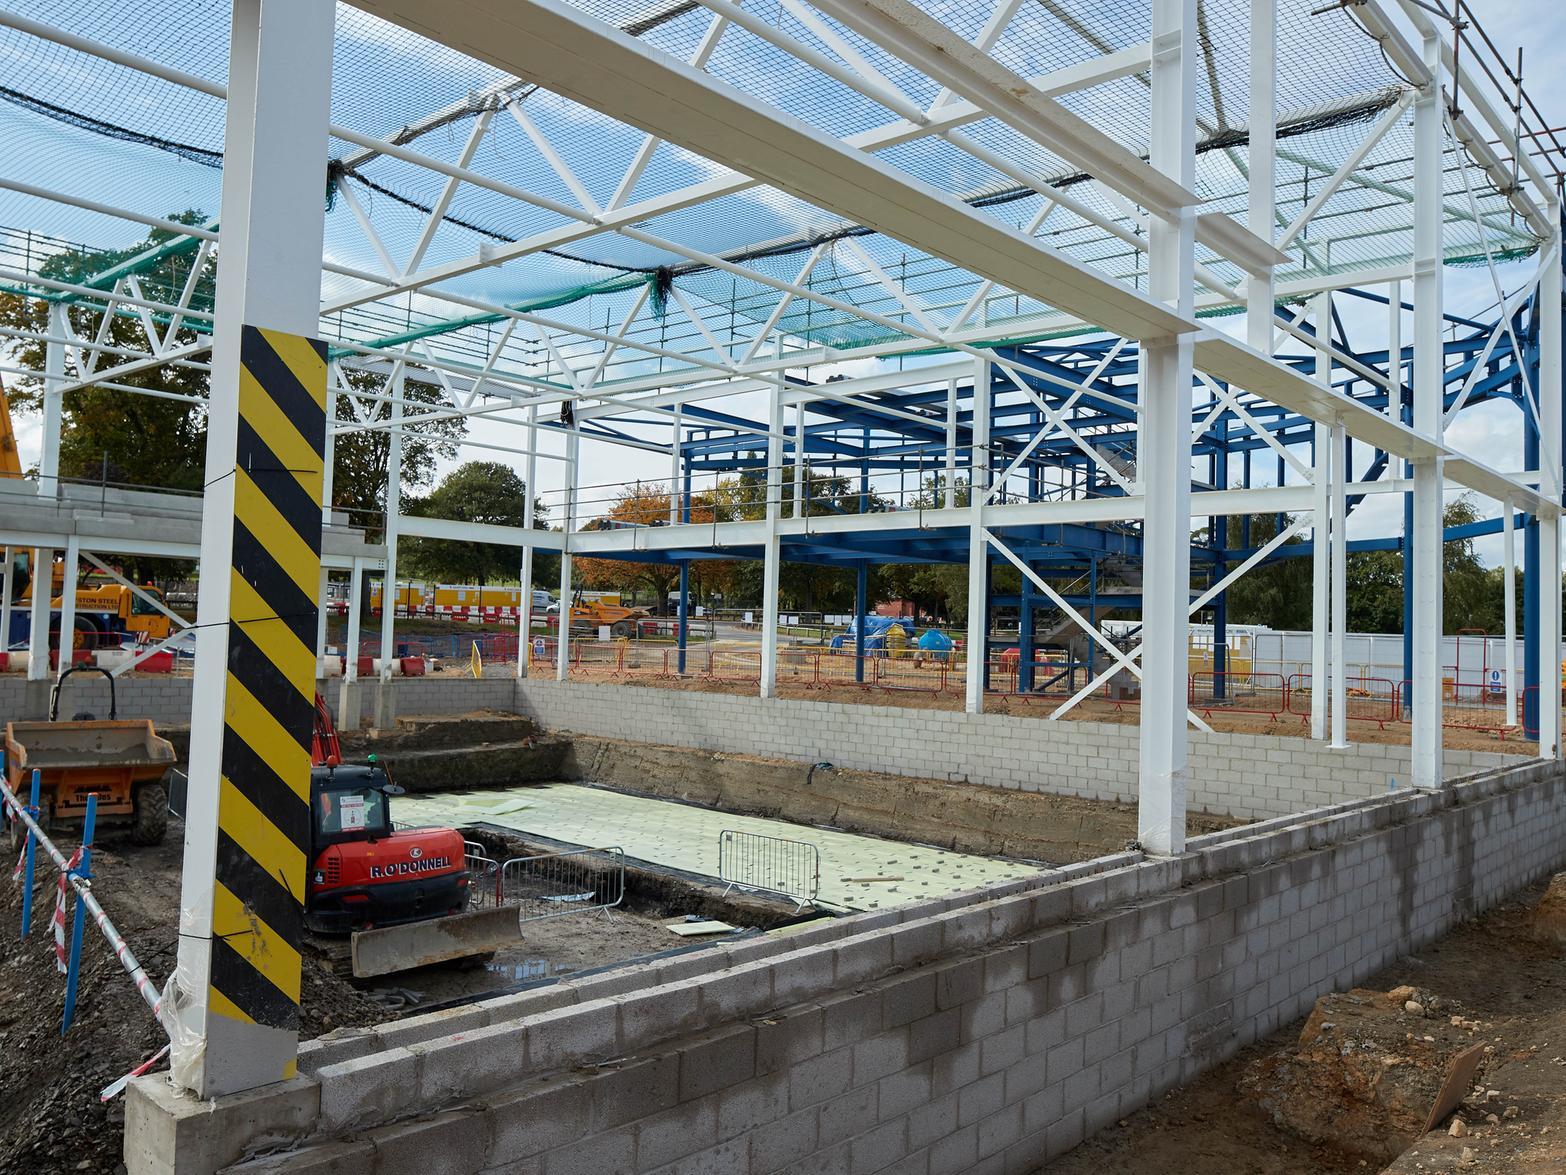 As well as the building, work was carried out in September to excavate the swimming pool. In late October, the pool was accidentally flooded with 1.5 million litres of water due to a burst pipe.